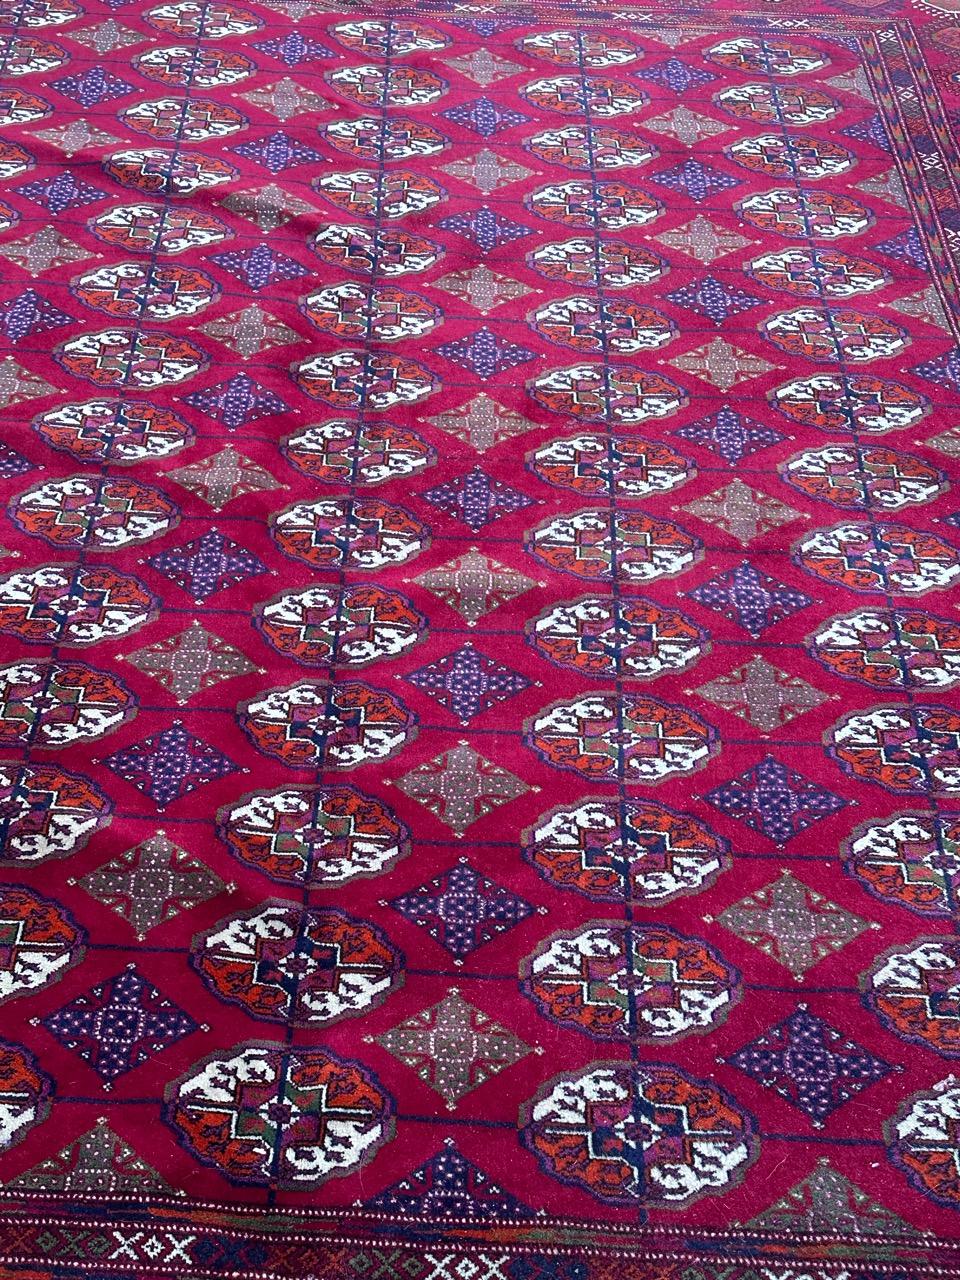 Wonderful large vintage Bokhara rug with beautiful geometrical design of typical Bokhara rugs and nice colours with a pomegranate red field, blue, orange, green, purple, pink and white at design, entirely and finely hand knotted with wool on wool